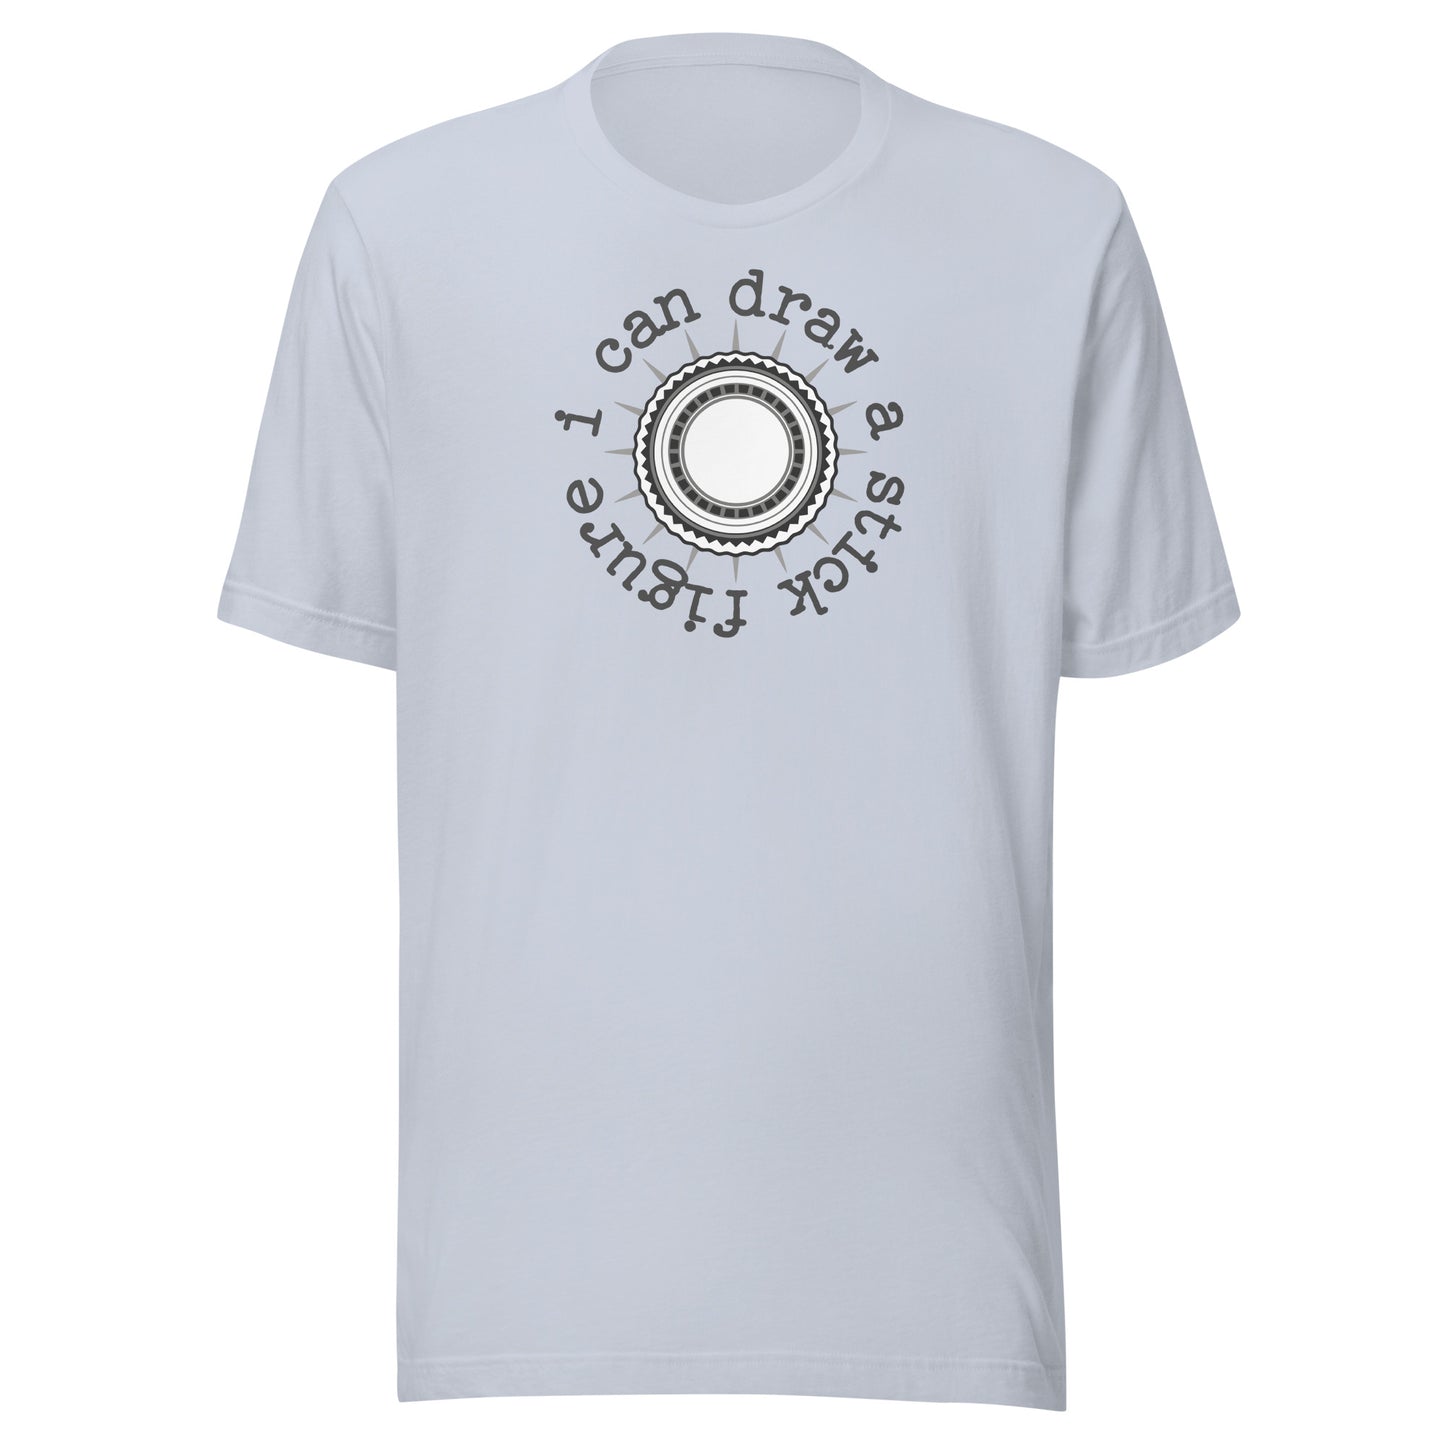 I can draw a stick figure ( interactive) t-shirt